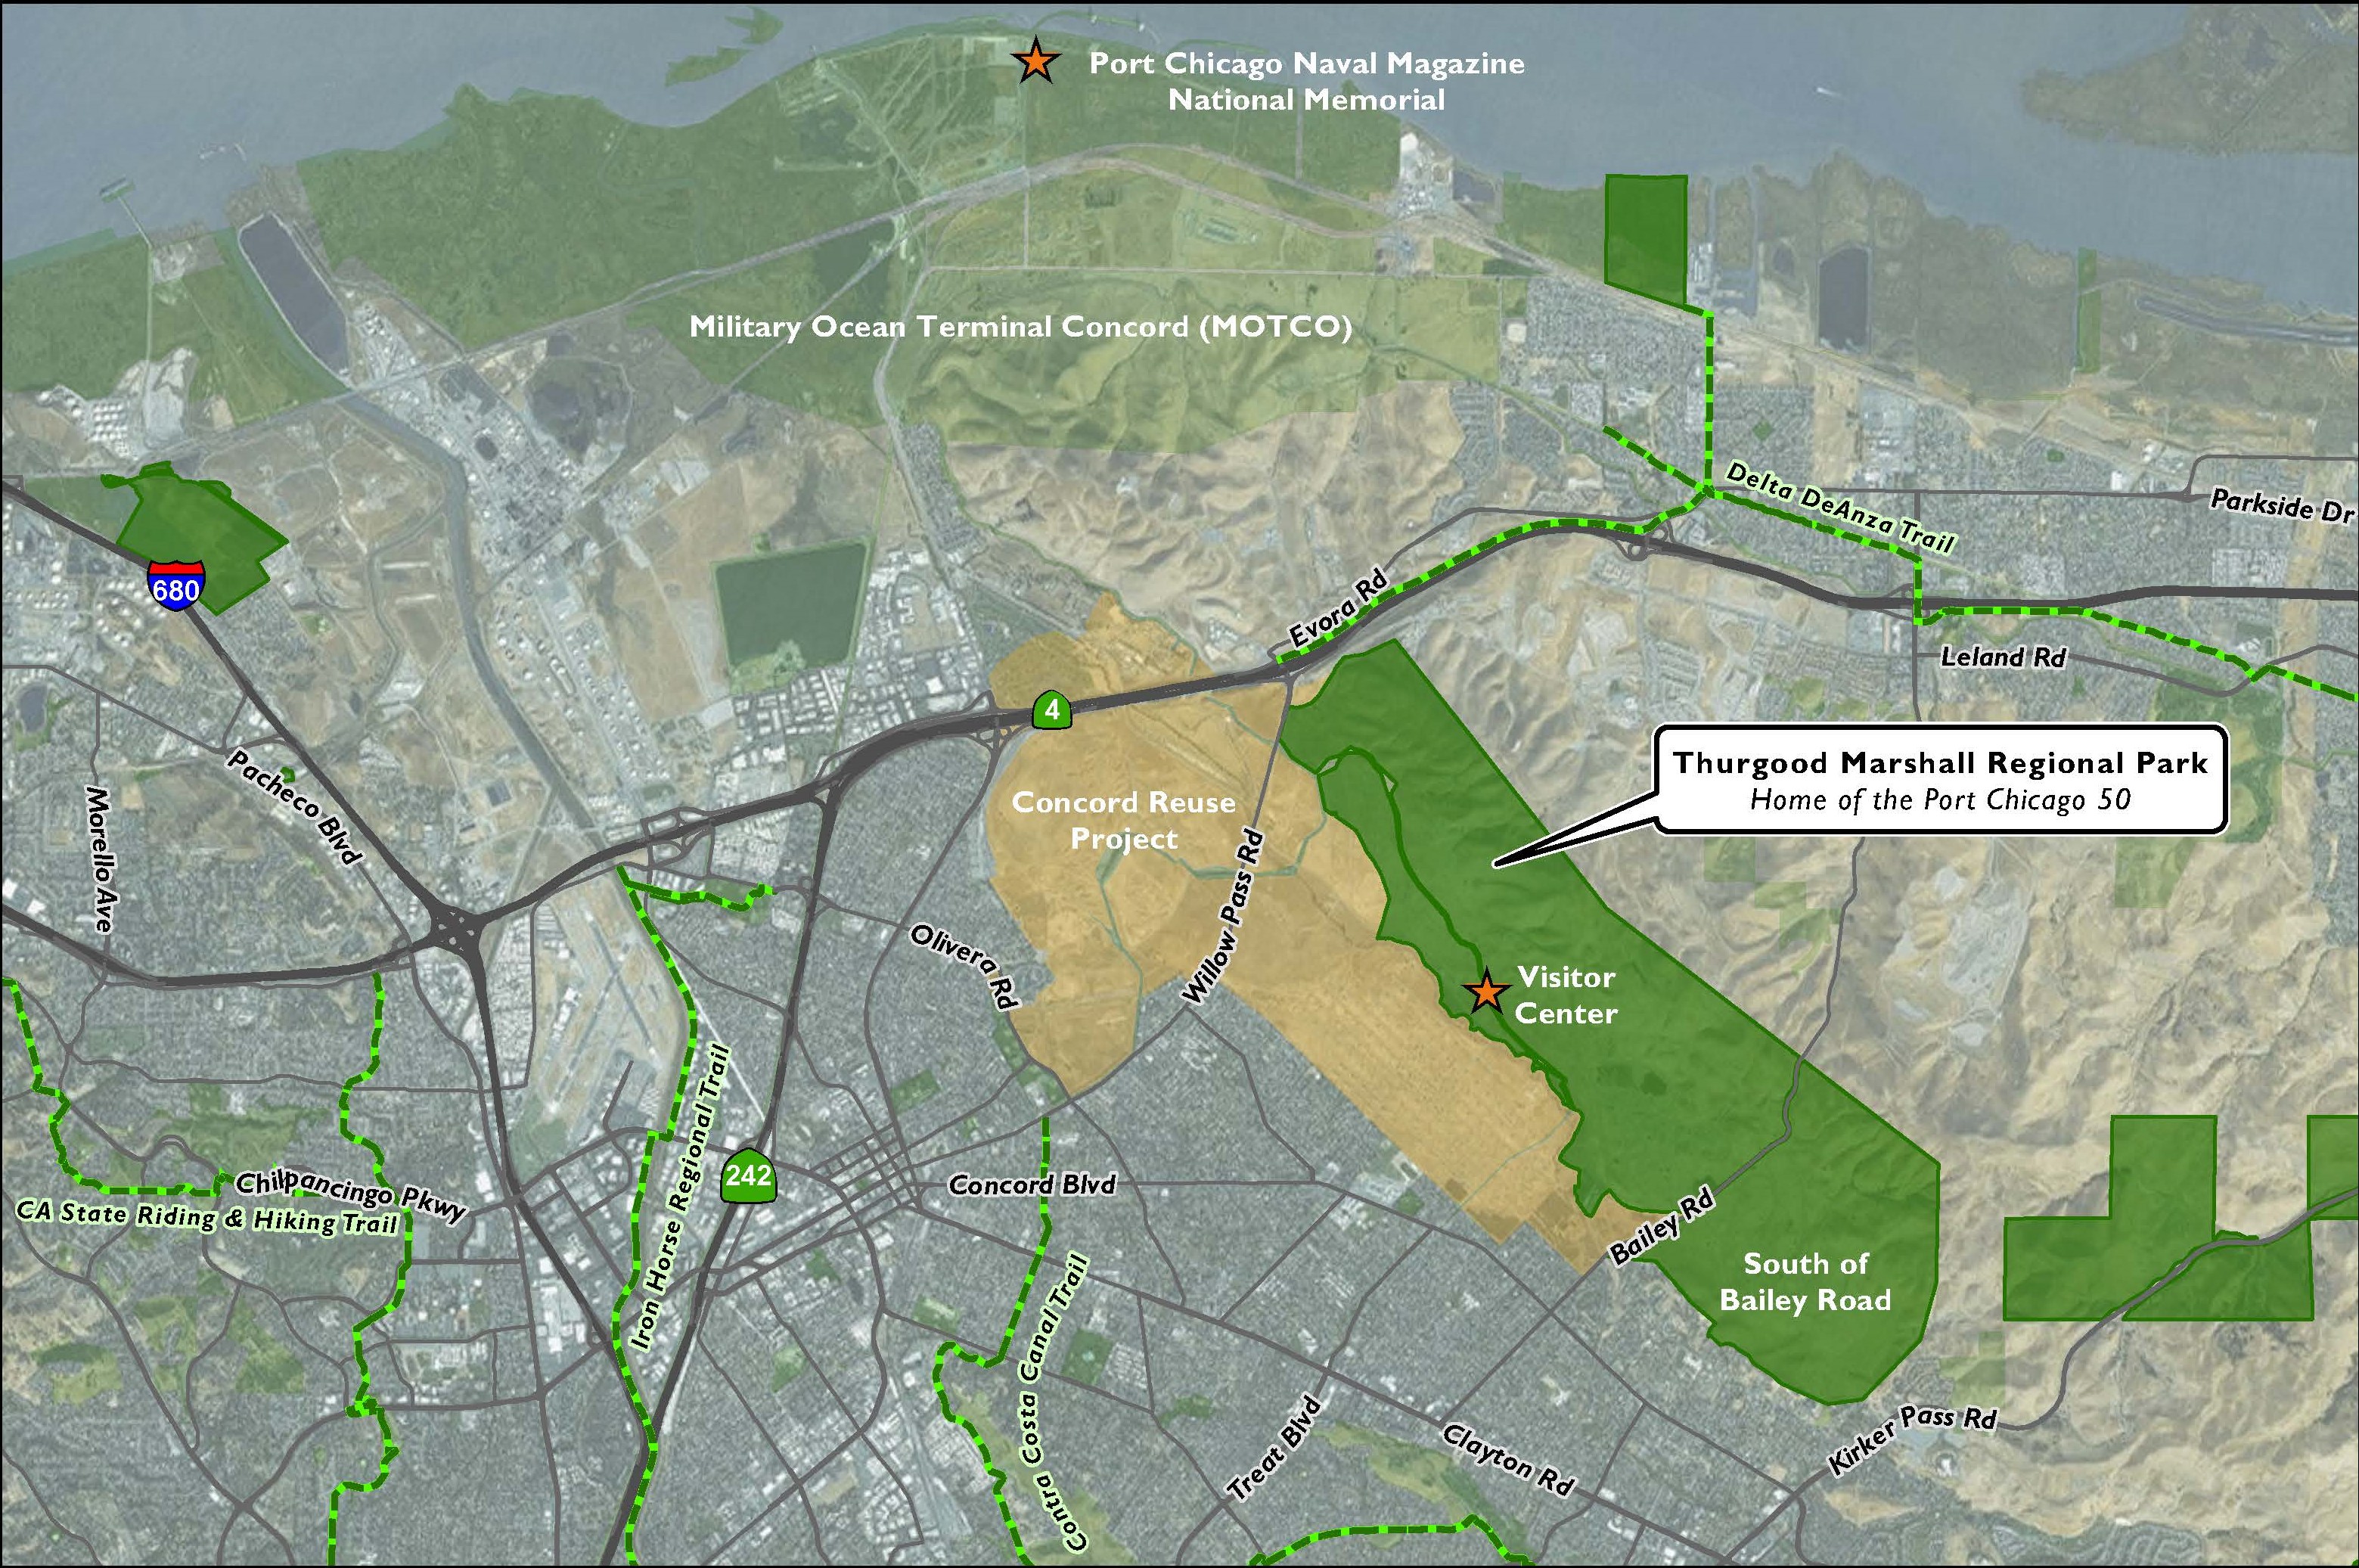 Proposal of Concord Map for Thurgood Marshall Regional Park Land Use Plan